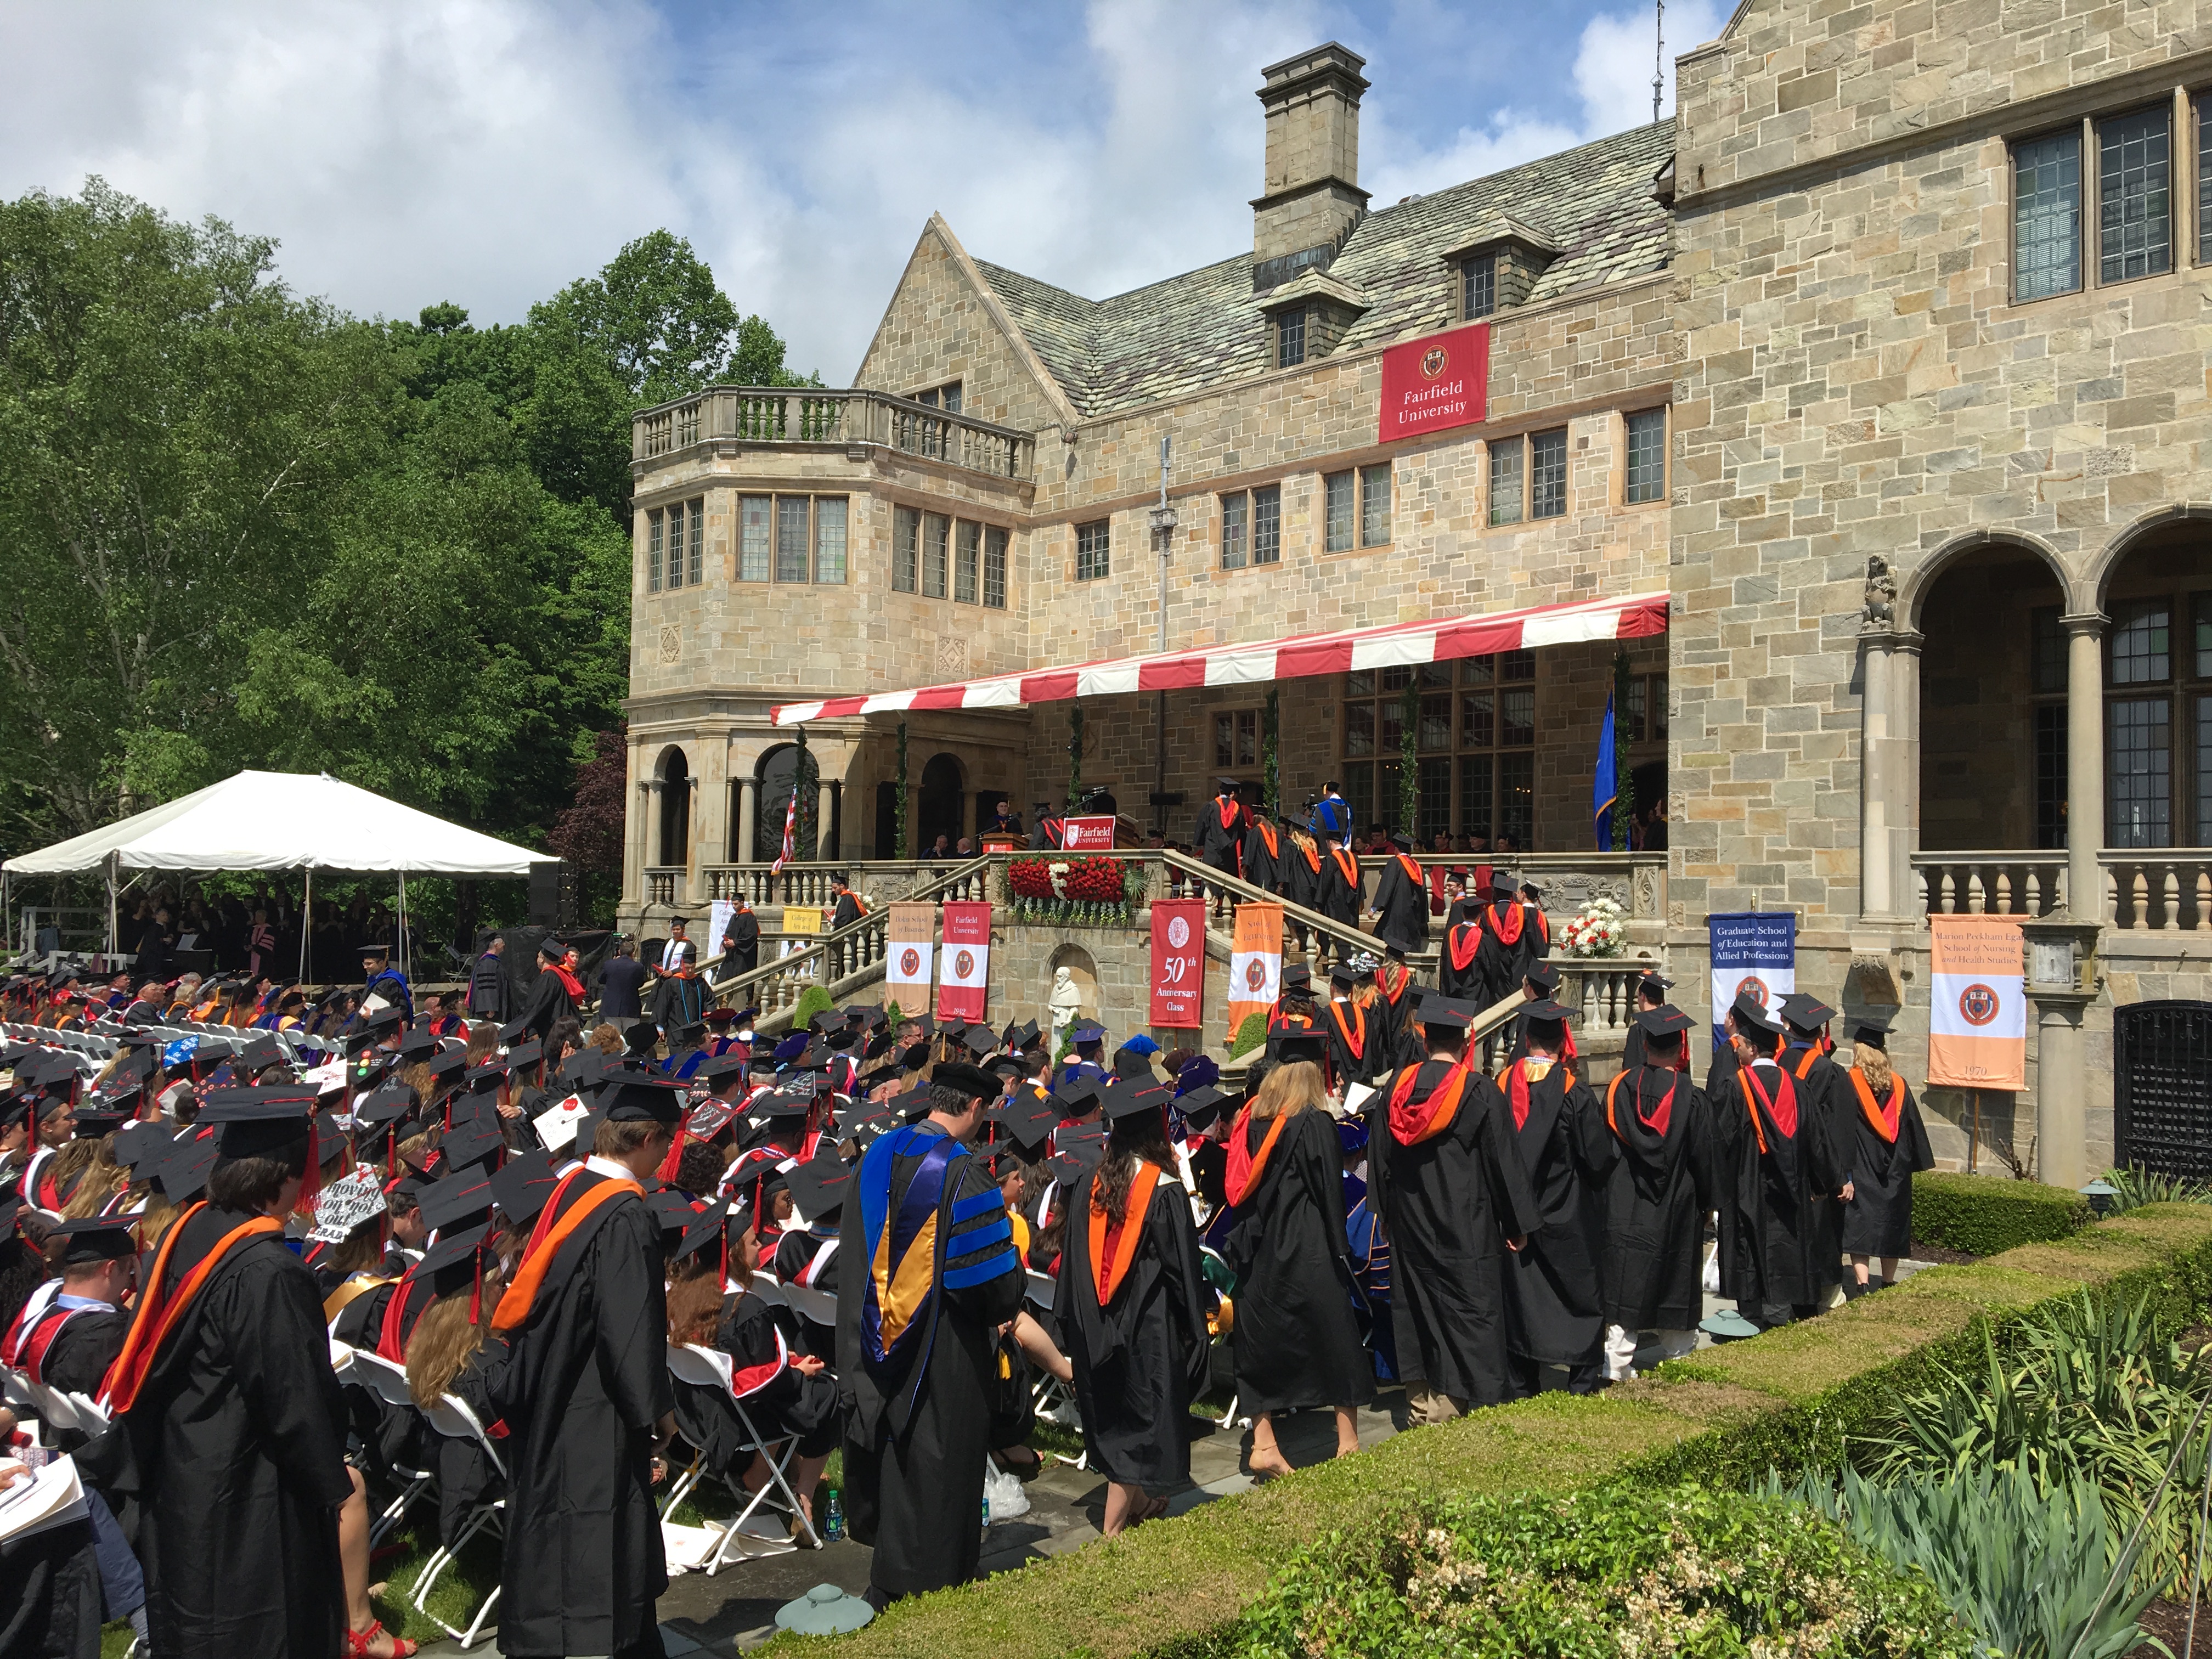 » Sun Shines on Fairfield University’s 68th Commencement Ceremony